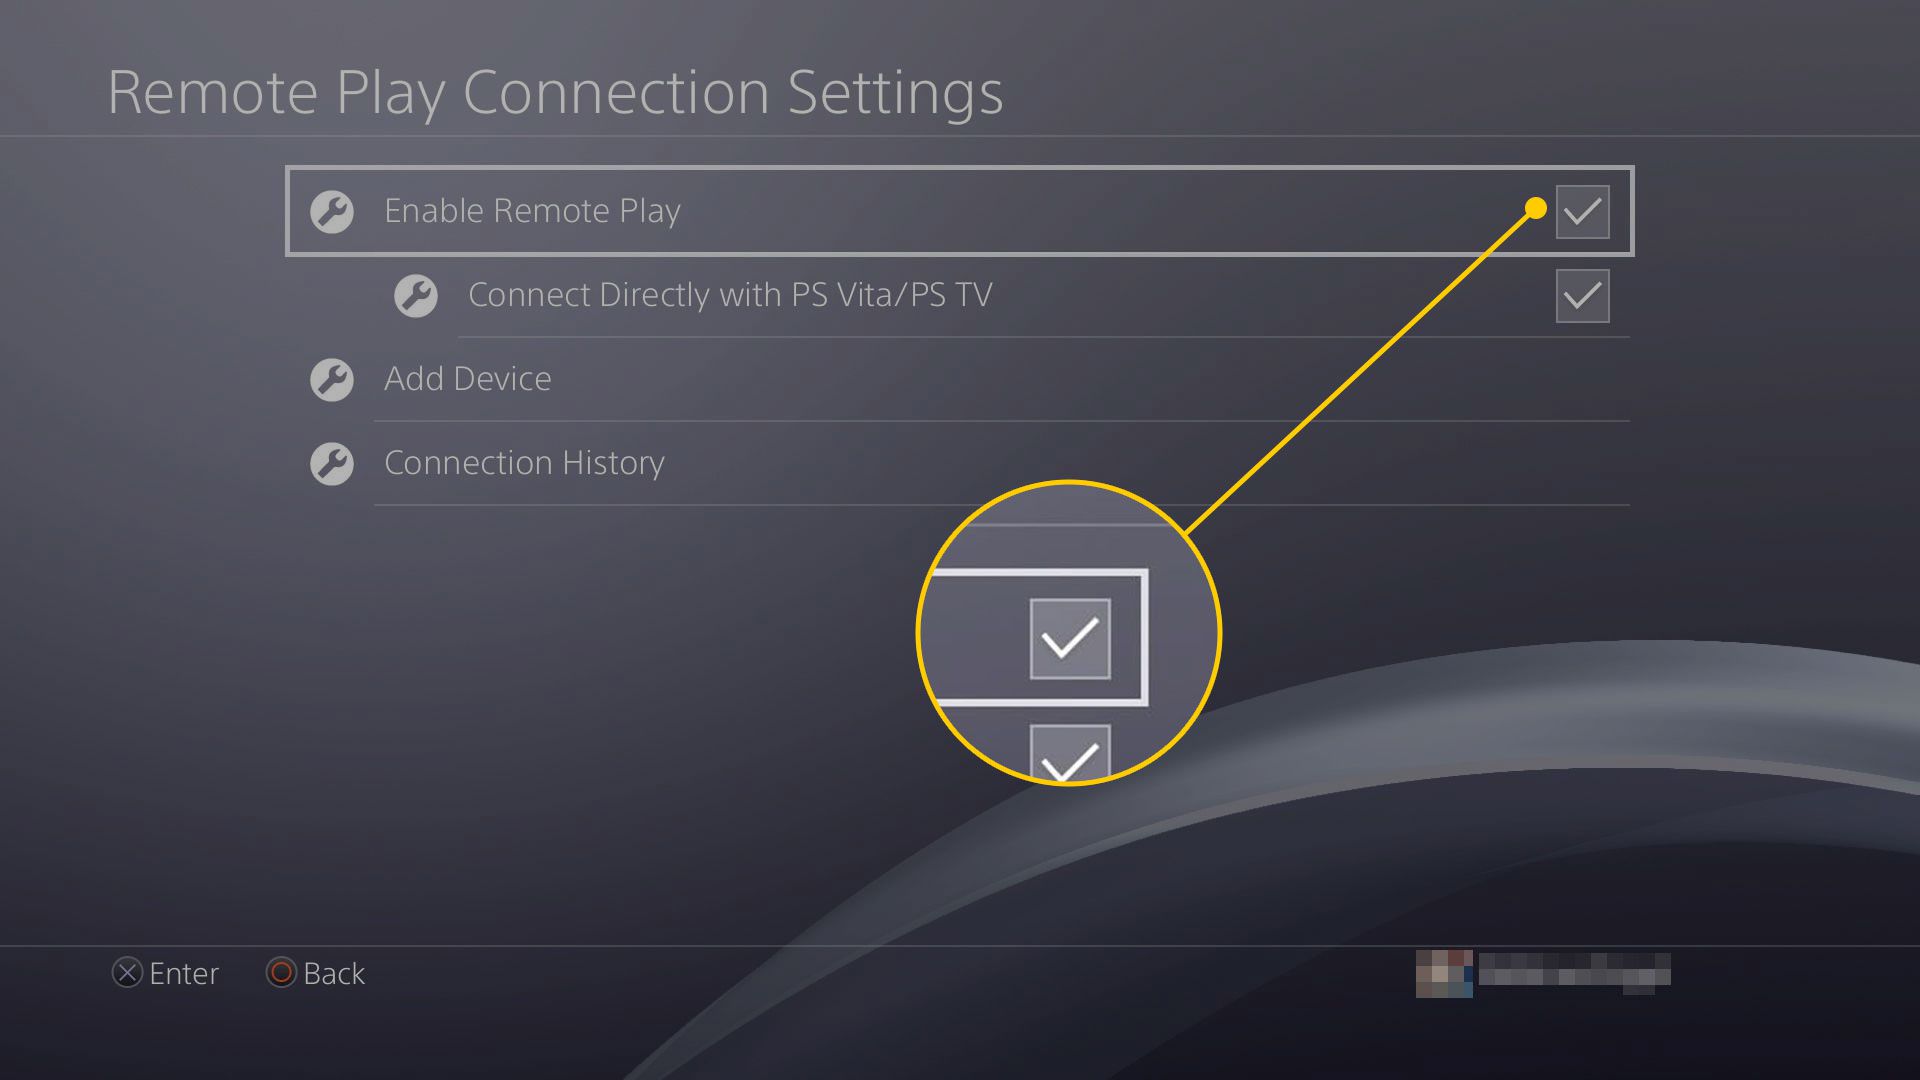 Re-attach your PS4 link carefully